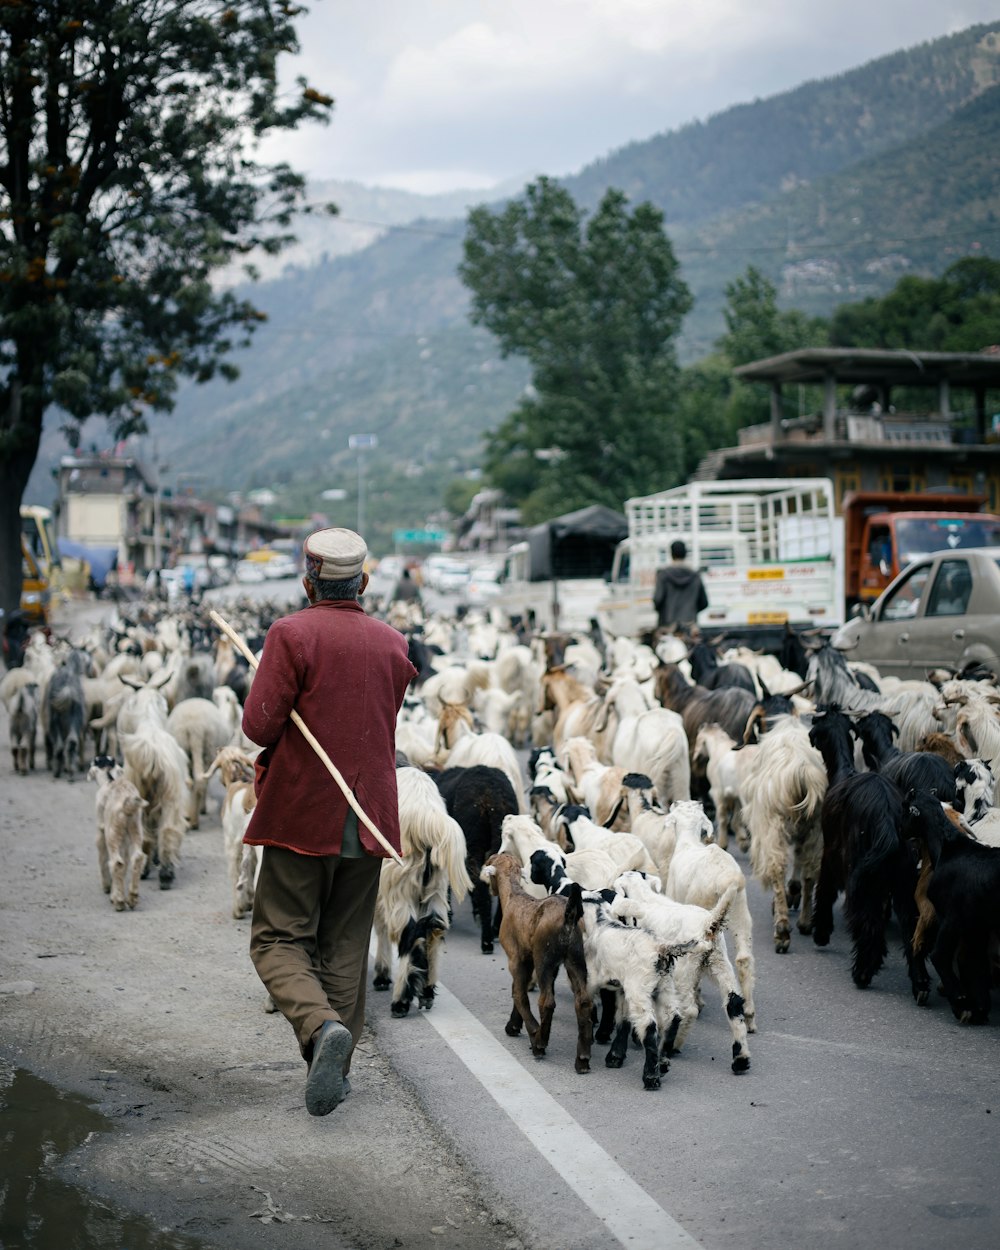 a person walking with a herd of sheep